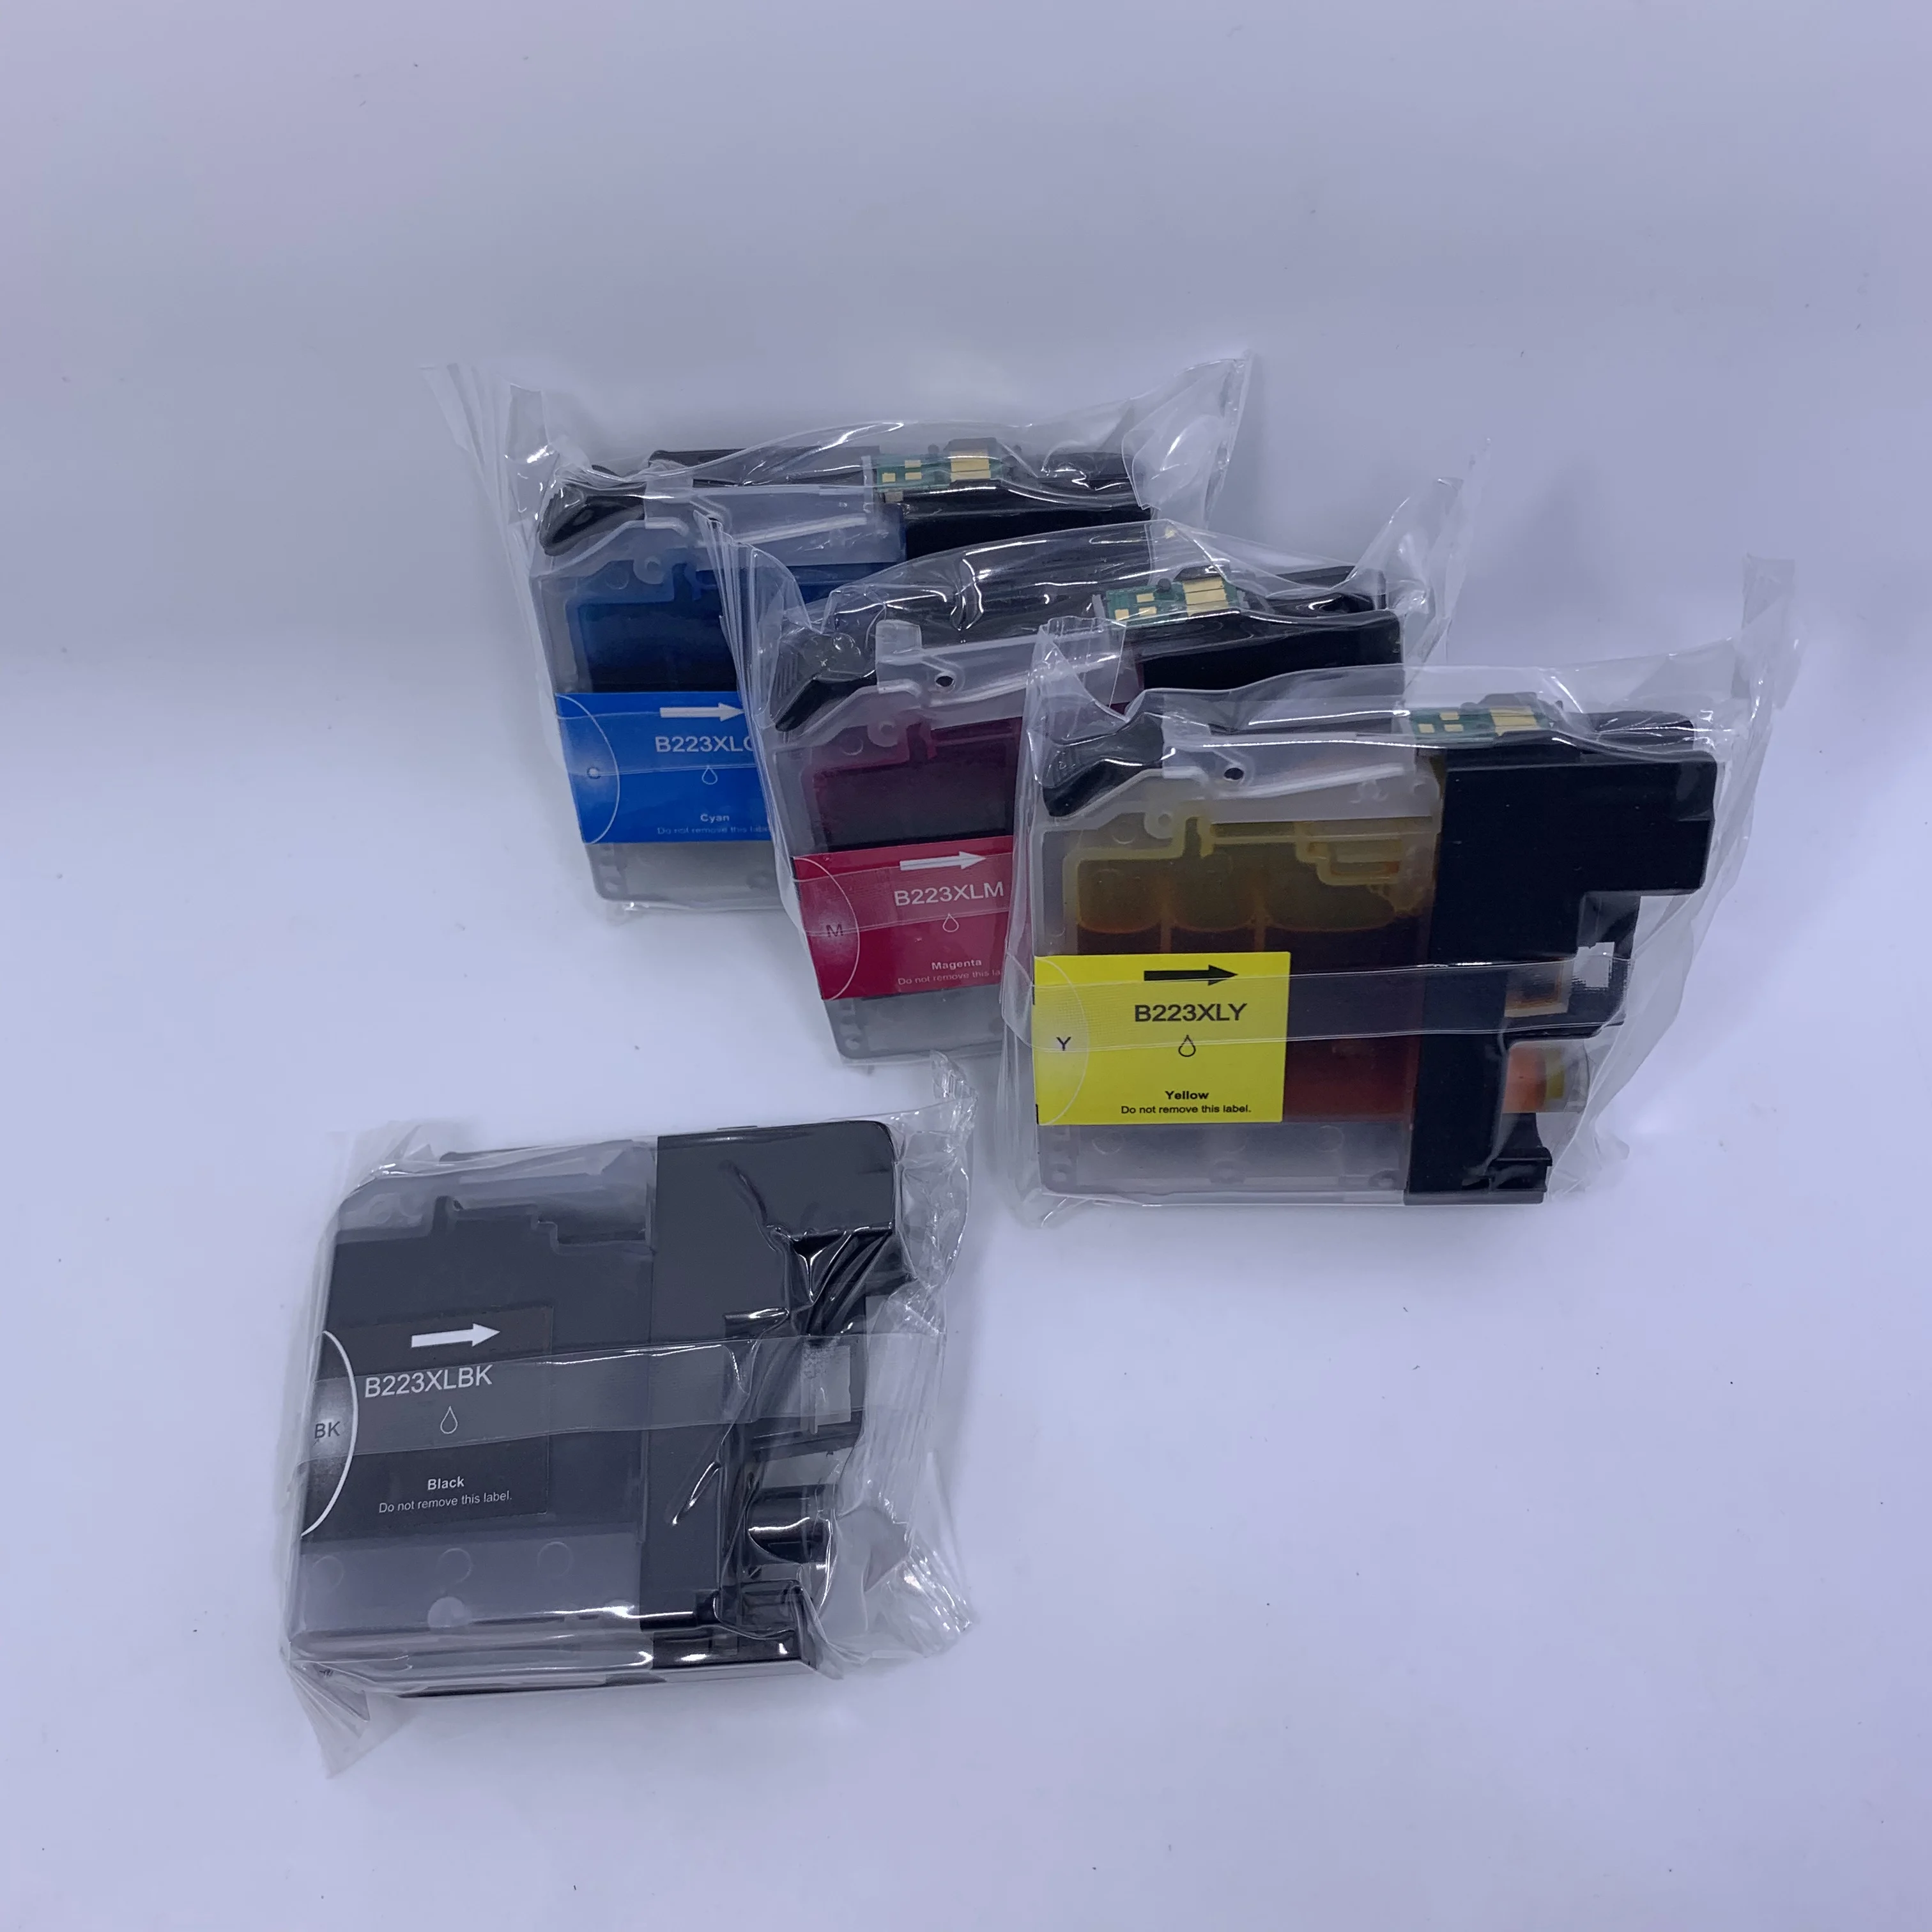 

YOTAT Compatible LC223XL LC 223 ink cartridge LC223 for Brother DCP-J562DW J4120DW MFC-J480DW J680DW J880DW J4620DW J5720DW